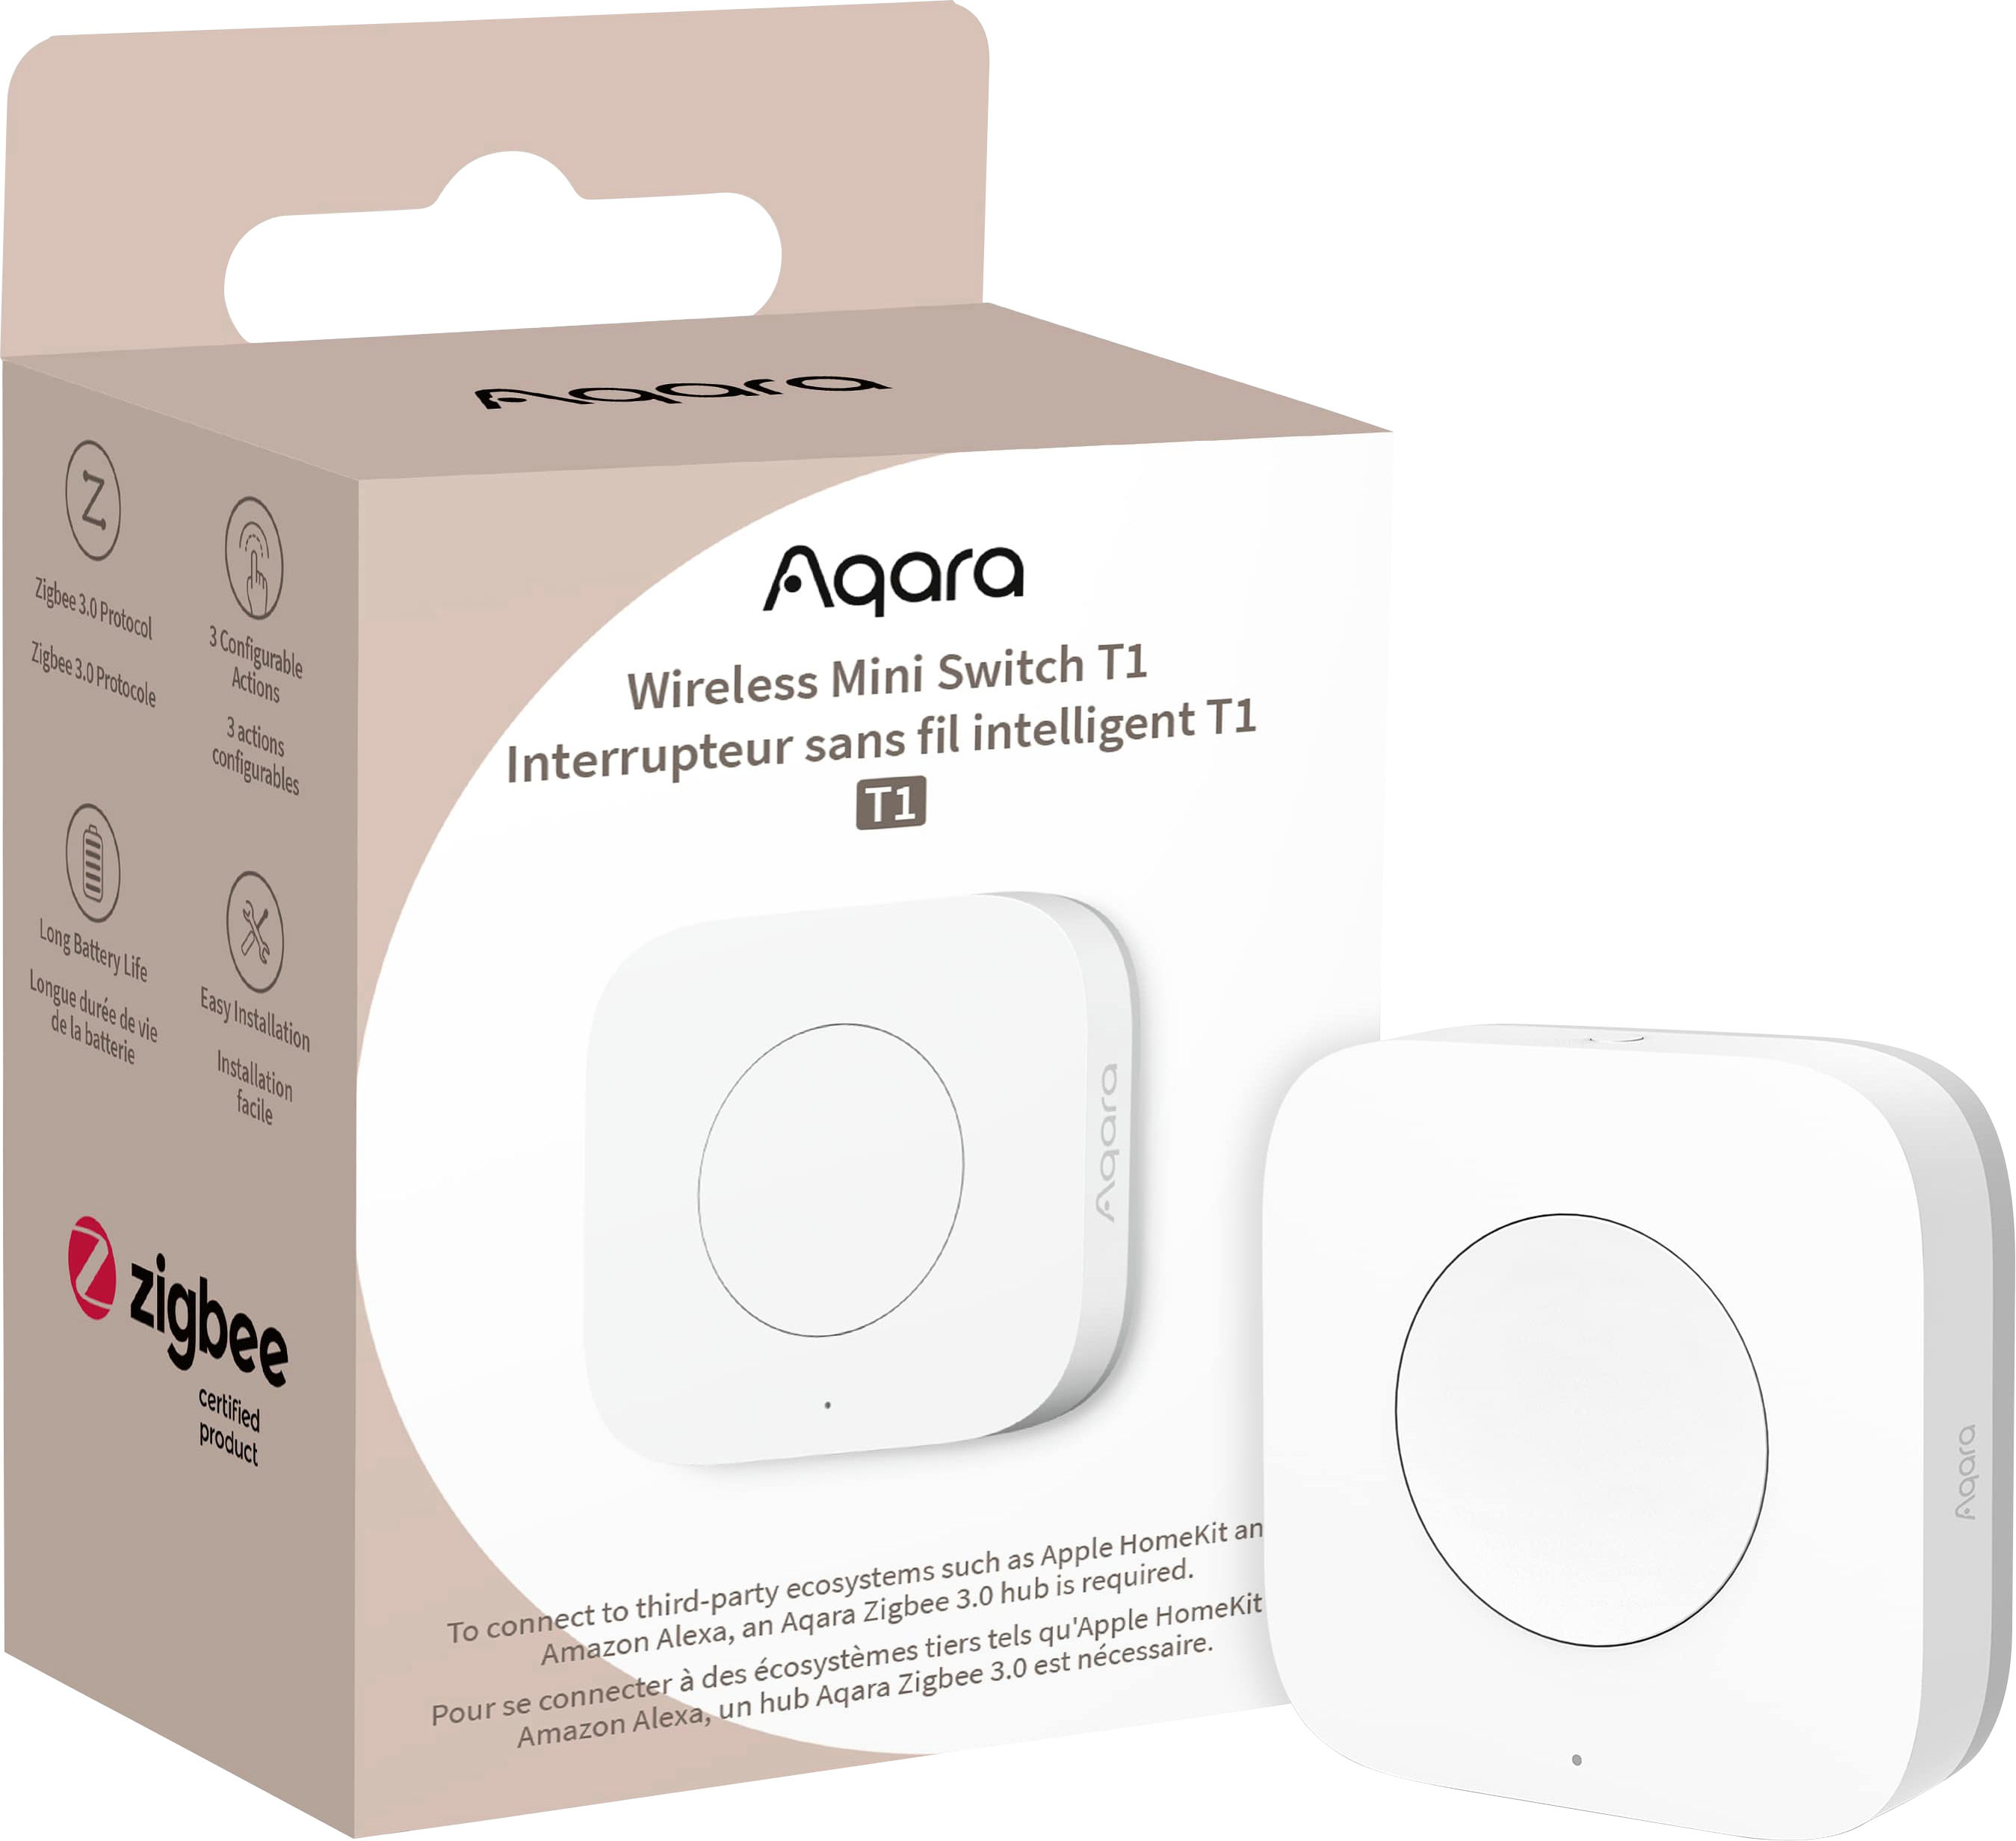 How to add Aqara devices to third-party Matter apps